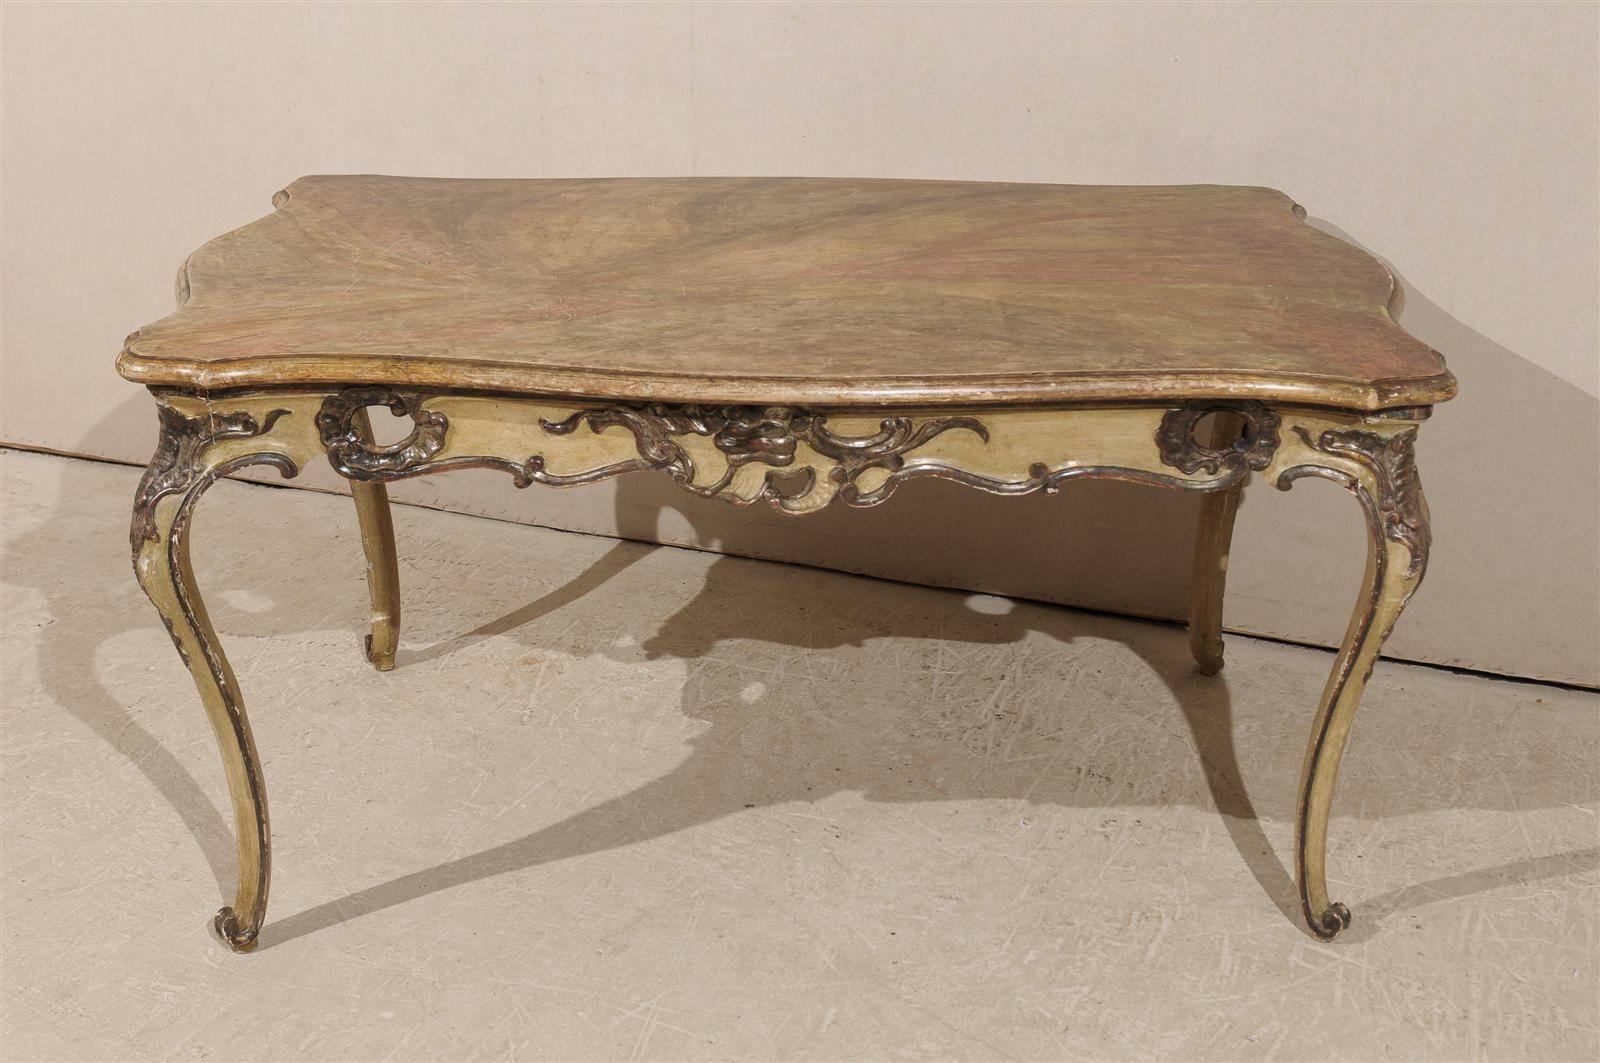 Italian Rococo Style Table, Desk With Faux-Marble Top, 19th Century For Sale 1